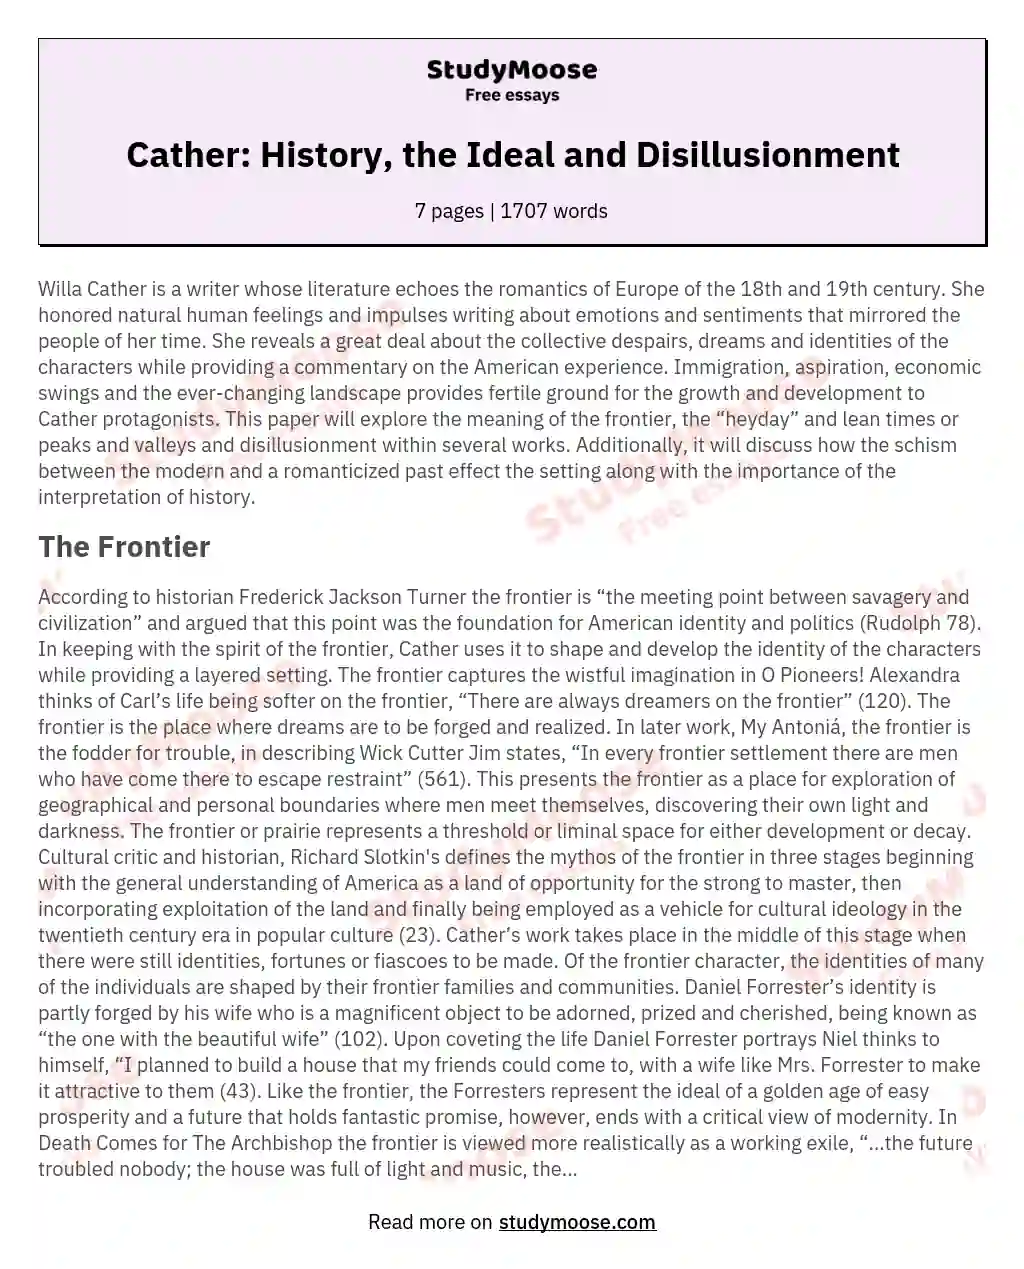 Cather: History, the Ideal and Disillusionment essay